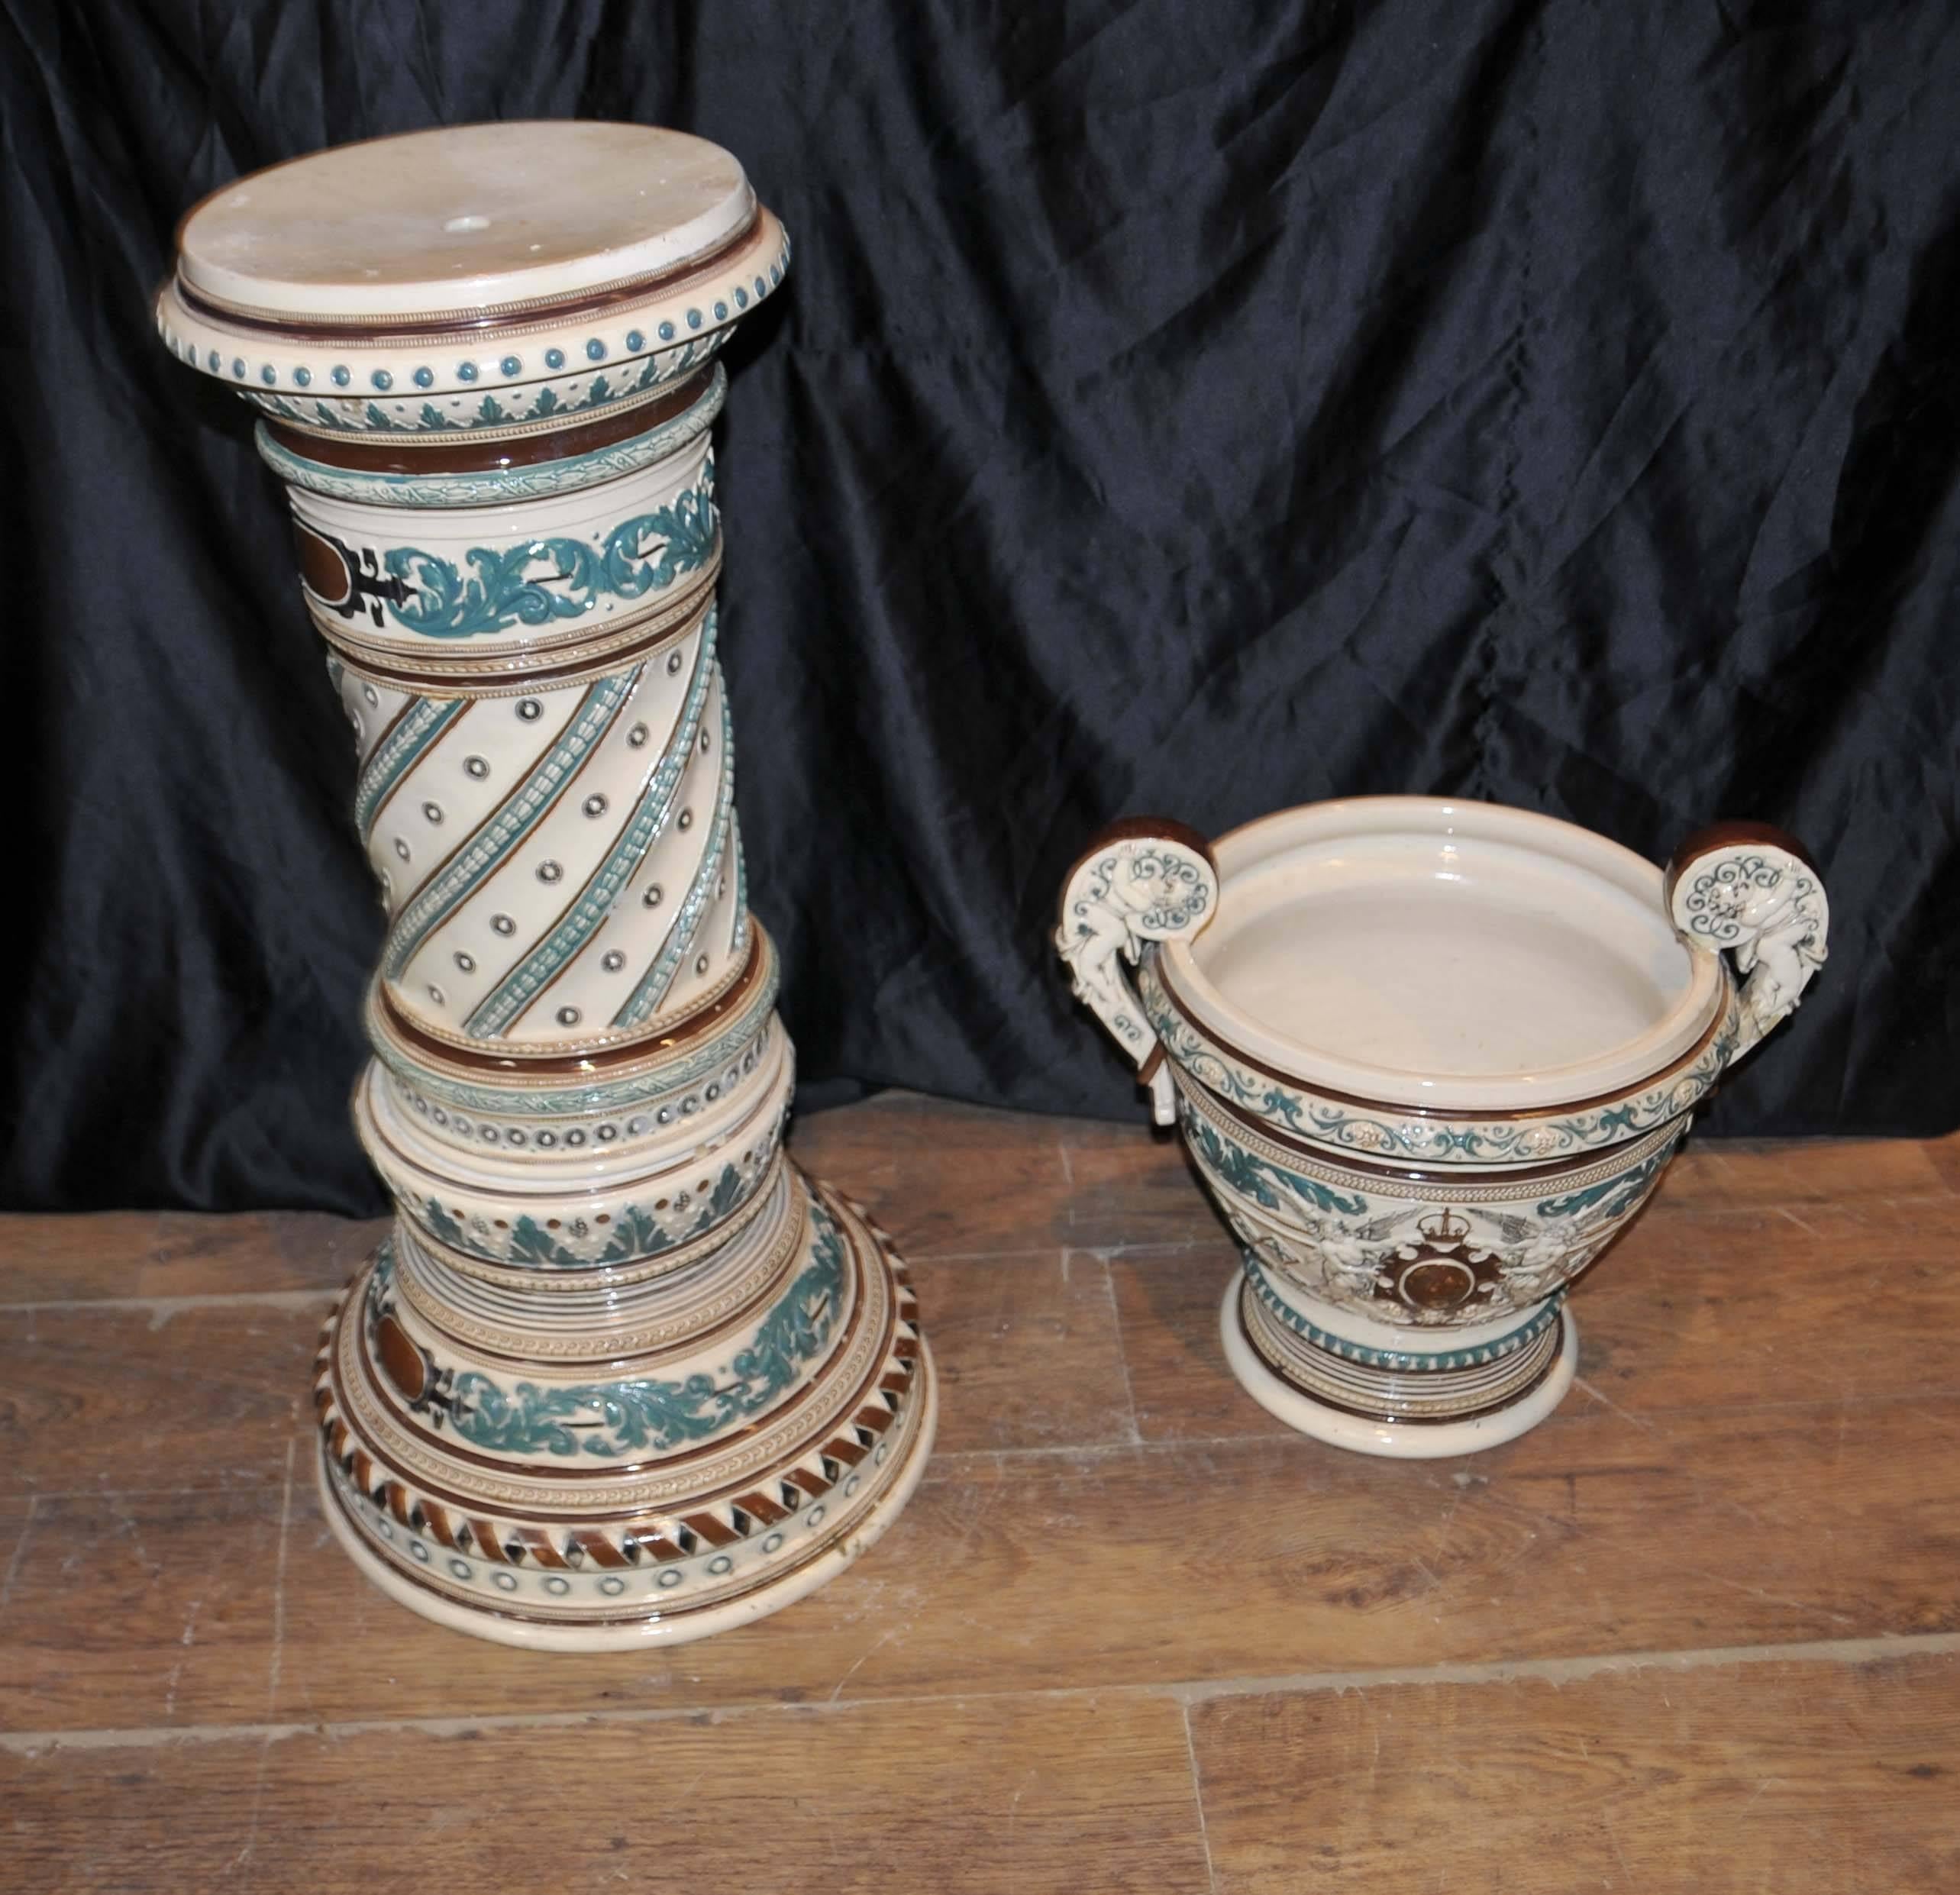 English Majolica Porcelain Jardiniere Plant Stand Pot Column In Excellent Condition For Sale In Potters Bar, Herts